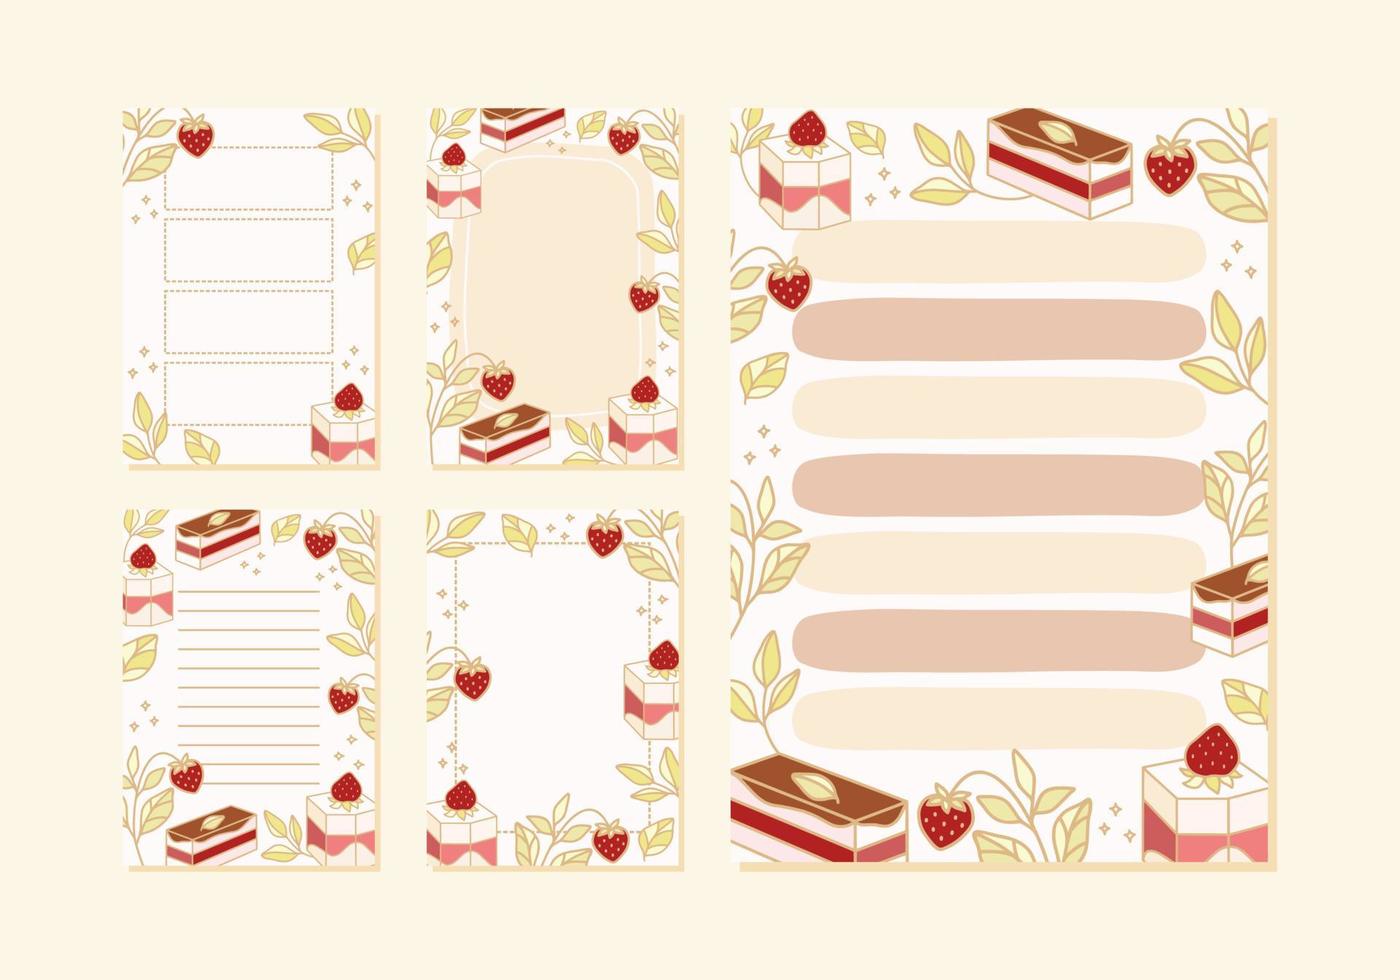 Collection of daily or weekly planner, note paper, to do list, wishlist, organizer templates decorated with cute strawberry cake illustrations vector